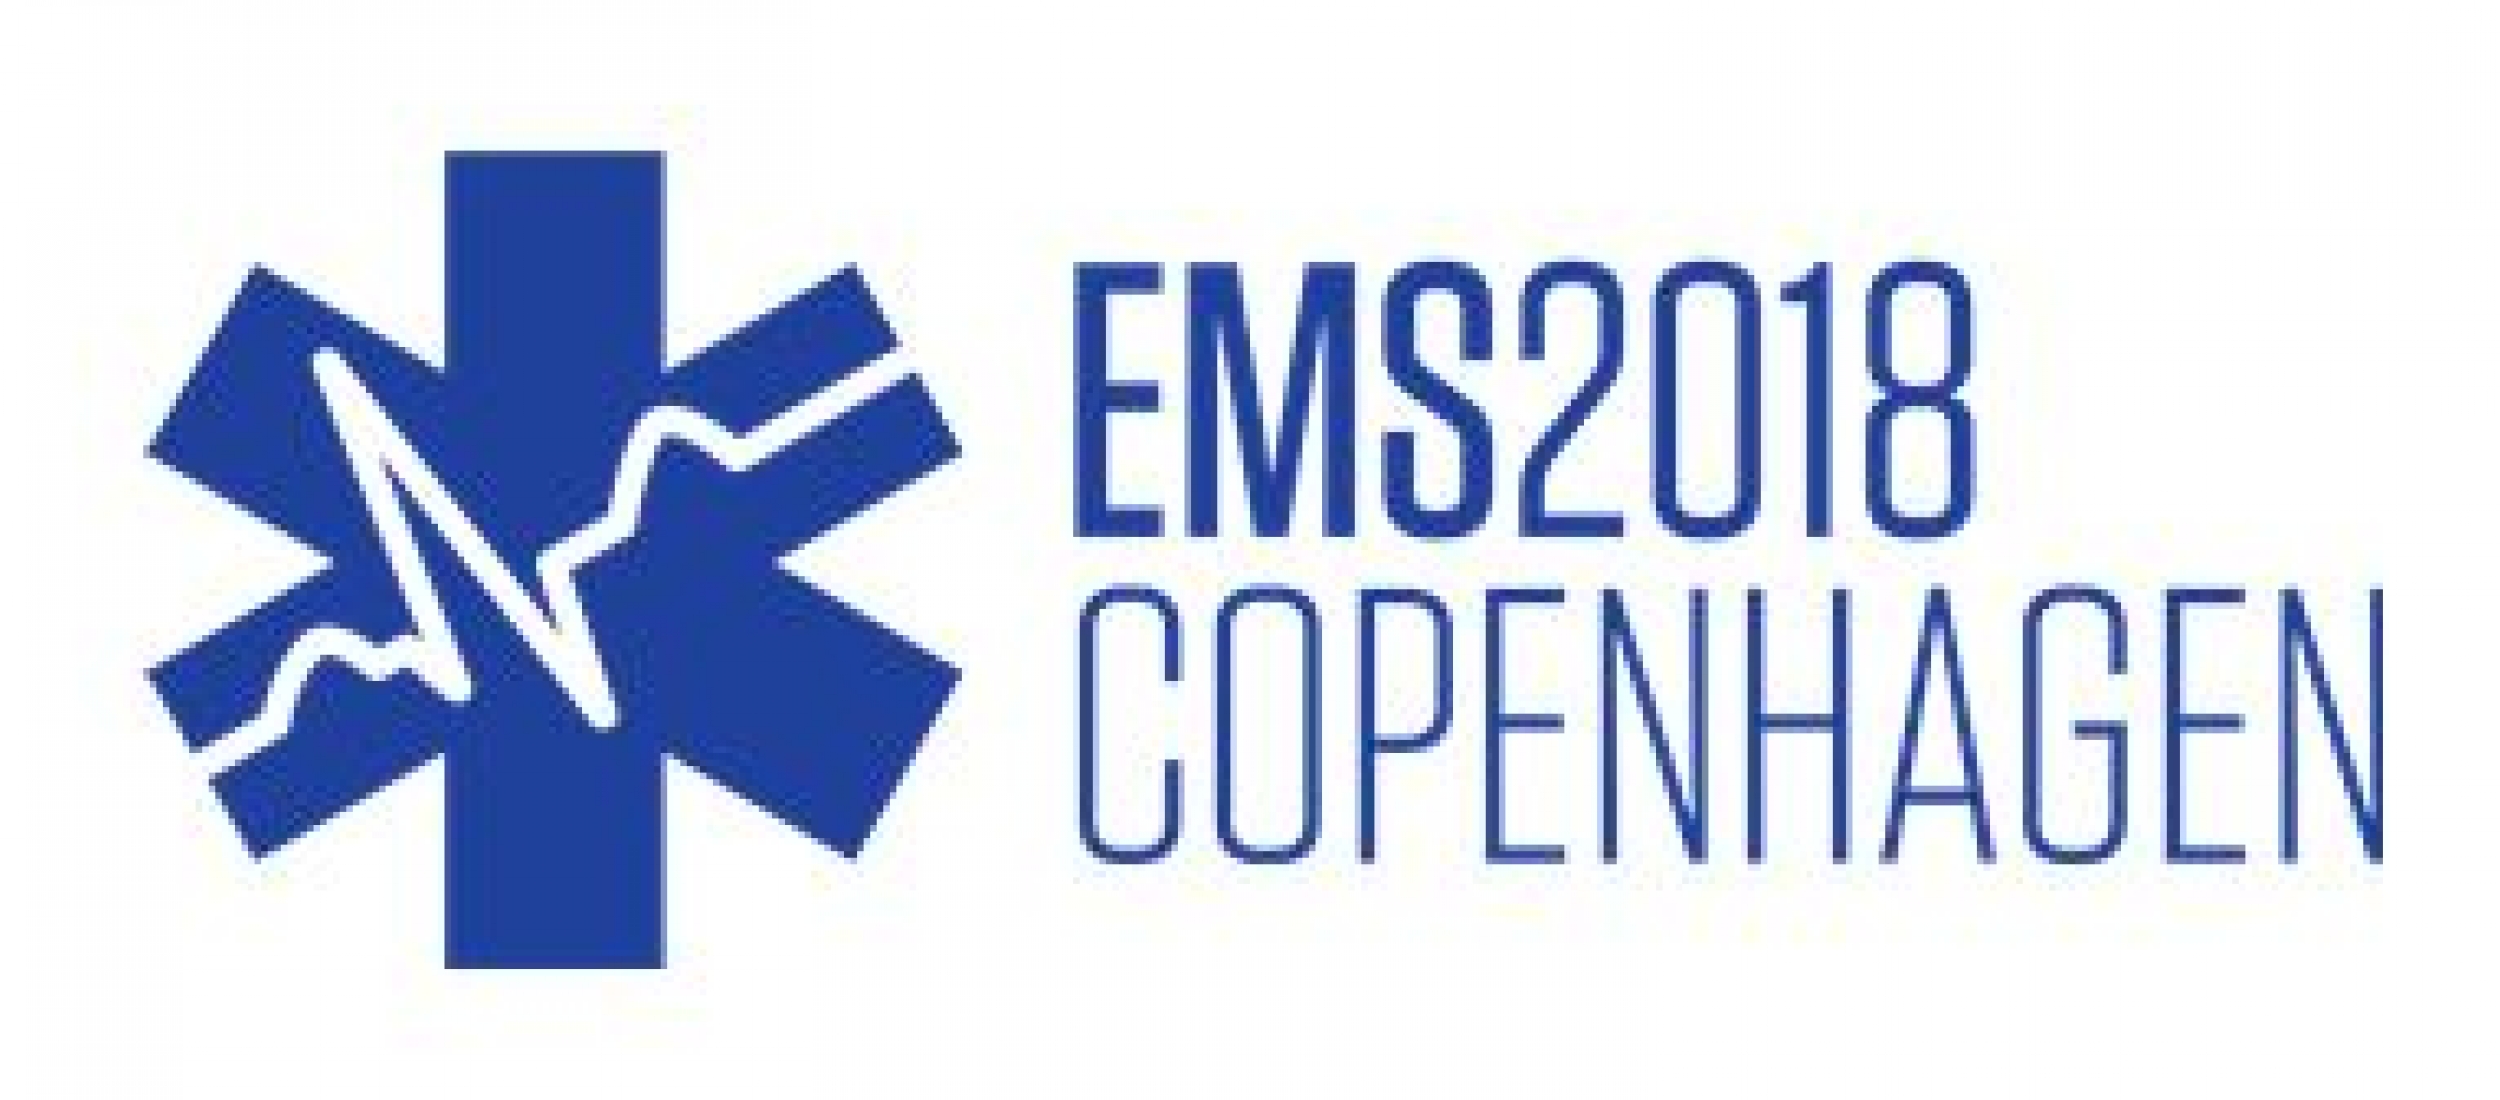 Emergency Medical Services Congress - EMS2018